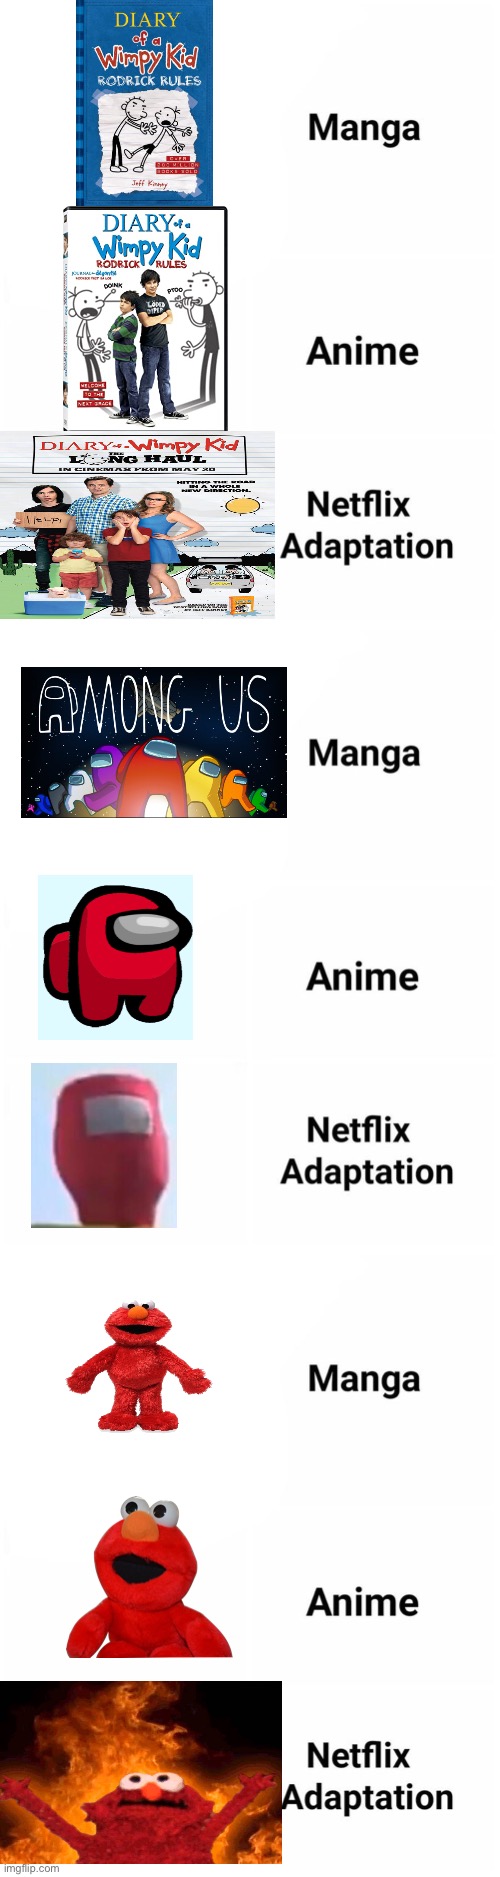 Netflix Adaptation Compilation (3 memes for the cost of 1 submission) | image tagged in netflix adaptation,among us,elmo,diary of a wimpy kid | made w/ Imgflip meme maker